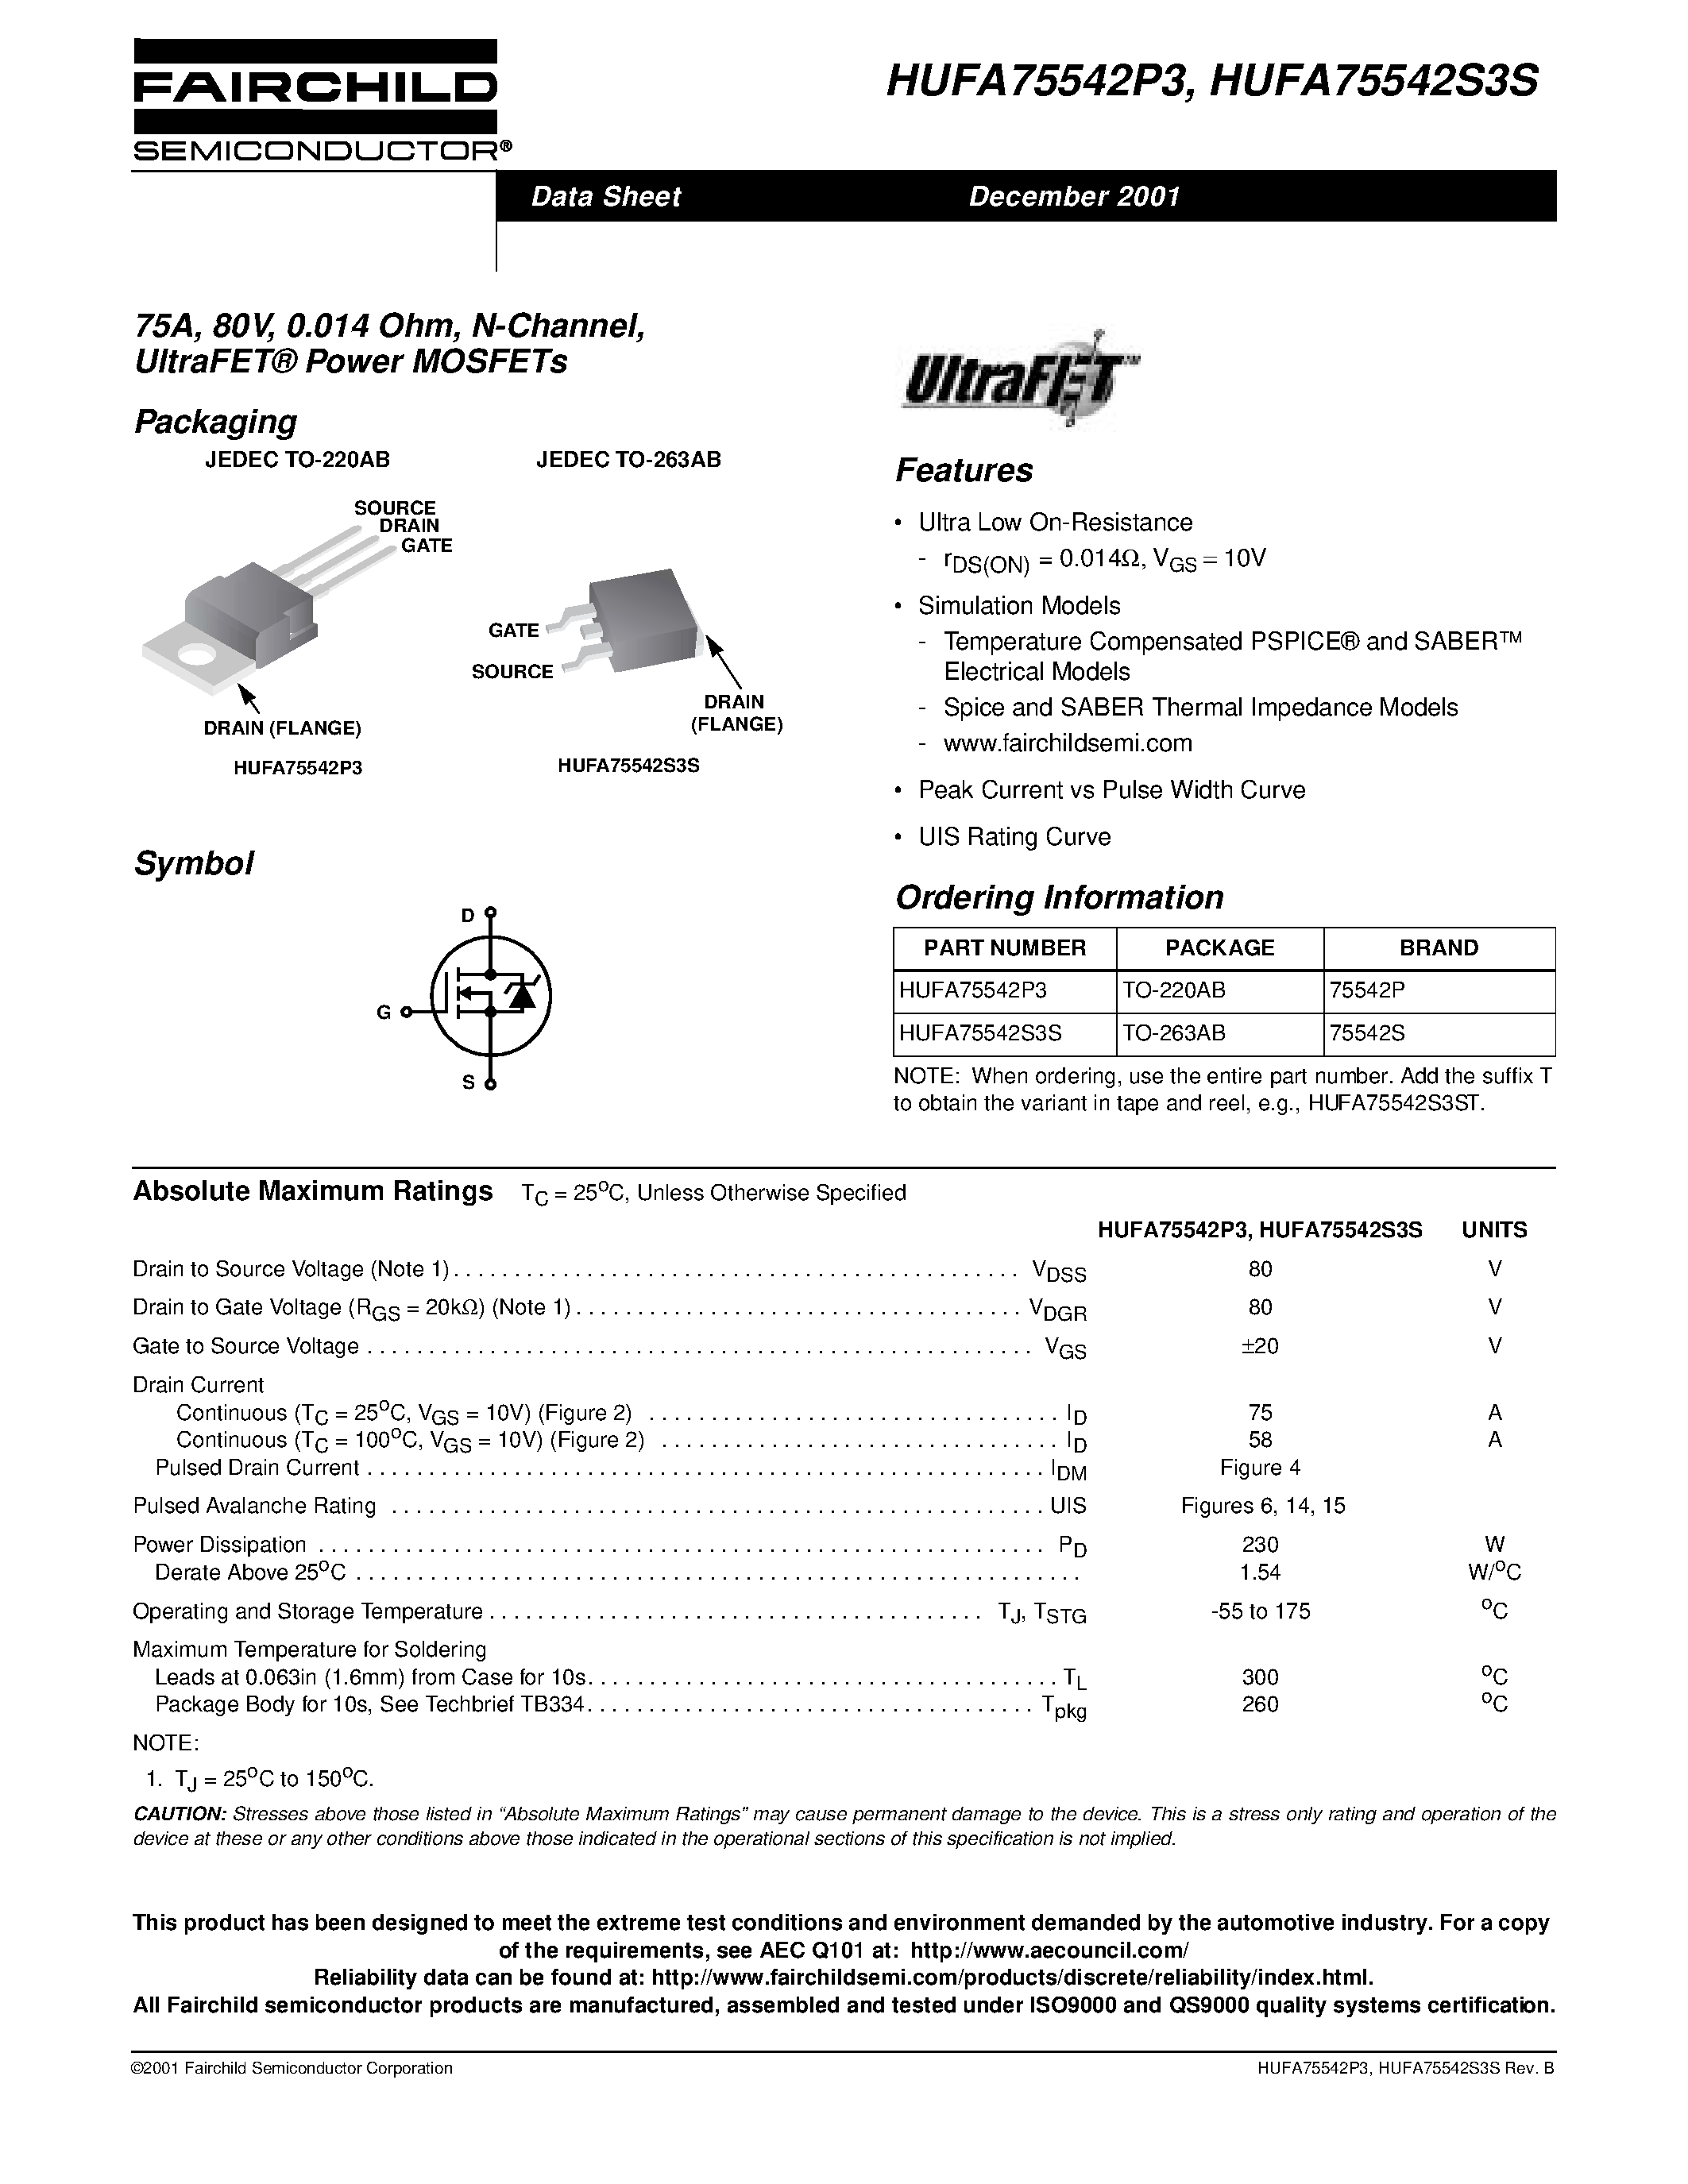 Datasheet HUFA75542P3 - 75A/ 80V/ 0.014 Ohm/ N-Channel/ UltraFET Power MOSFETs page 1